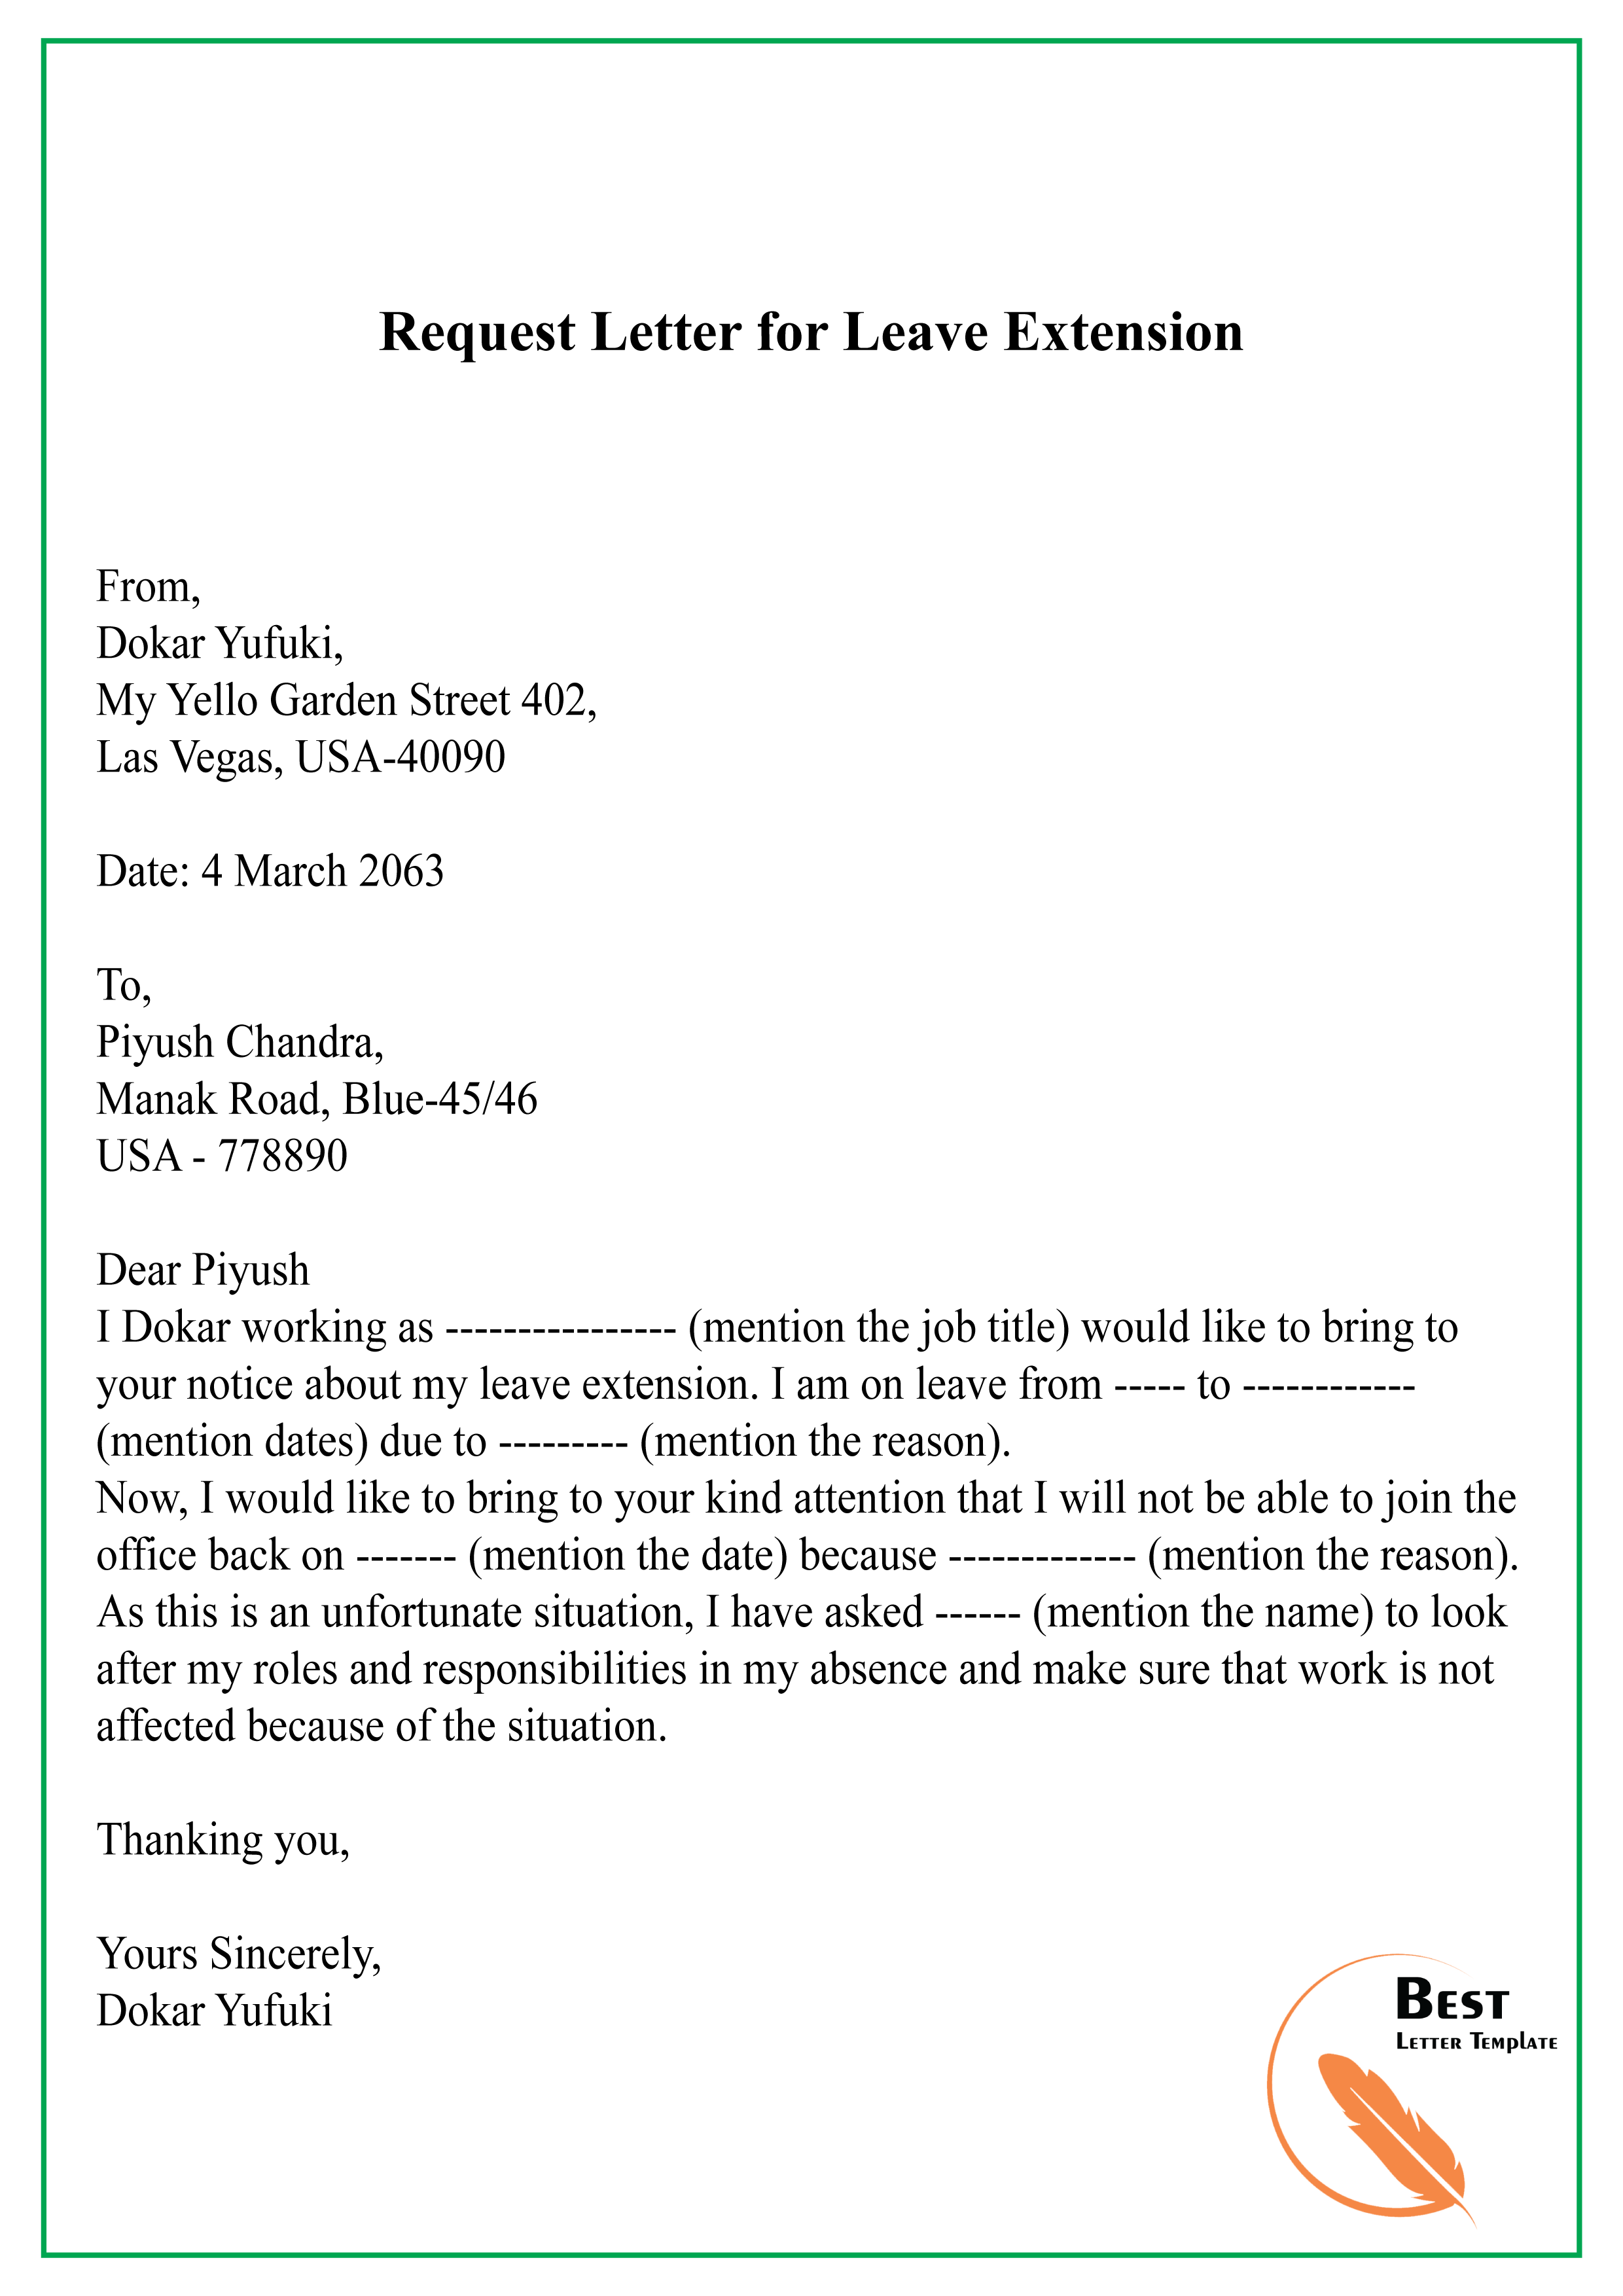 sample letter to employer requesting extended leave